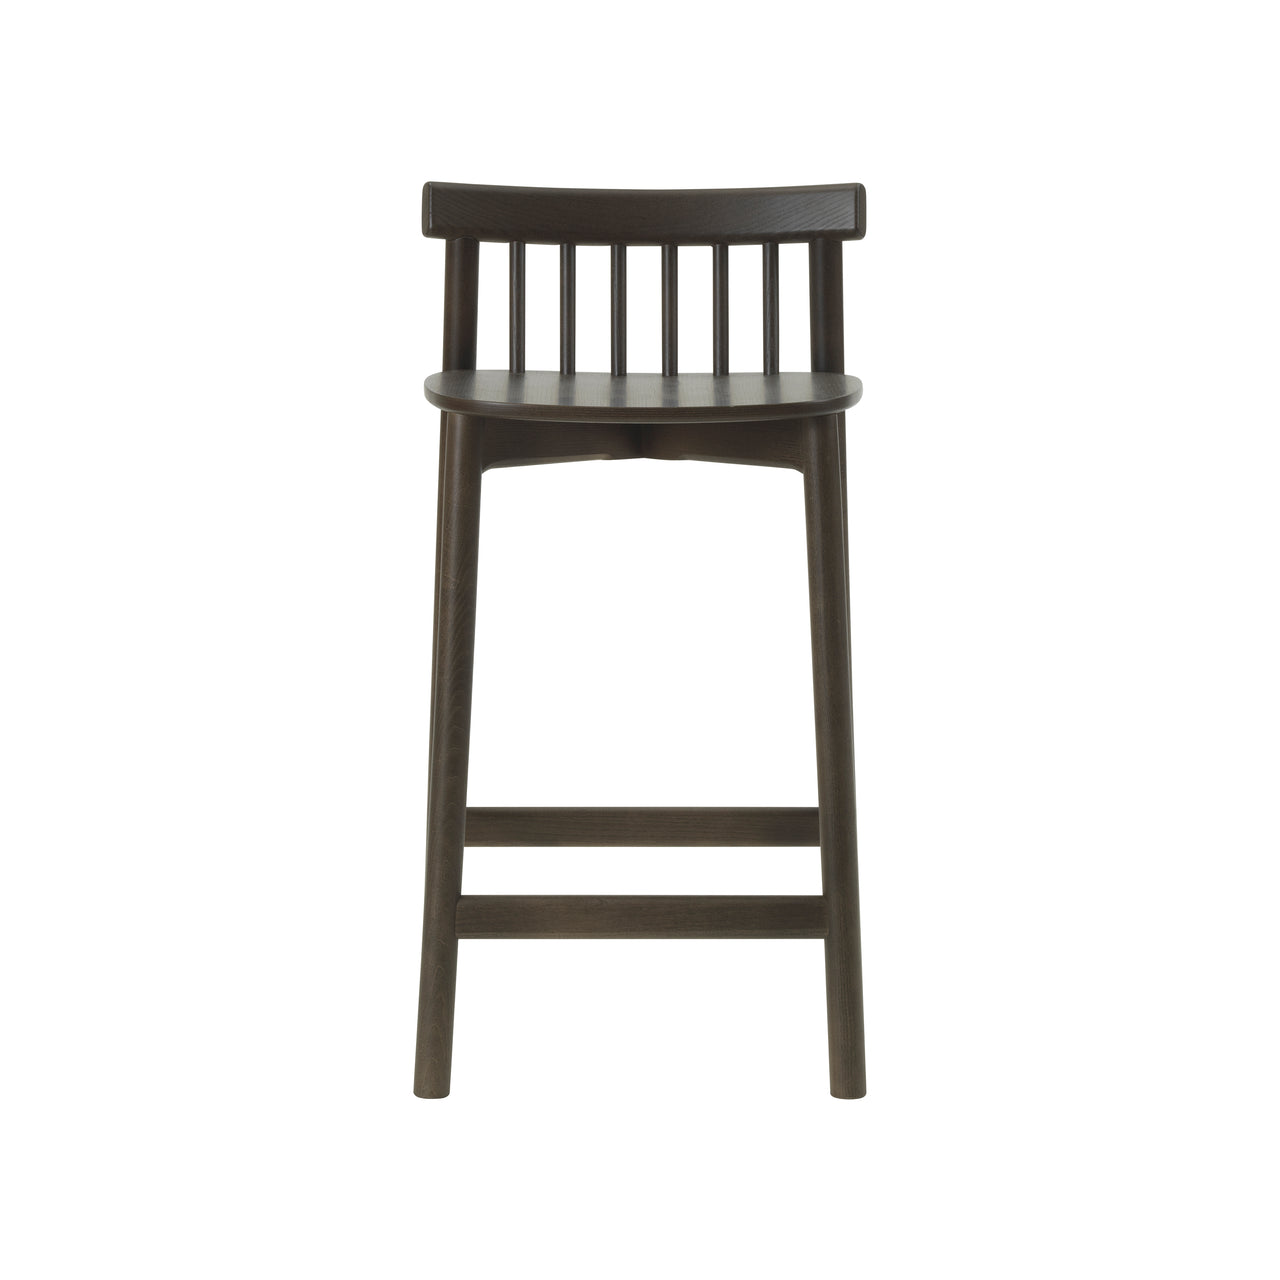 Pind Bar + Counter Stool: Counter + Brown Stained Ash